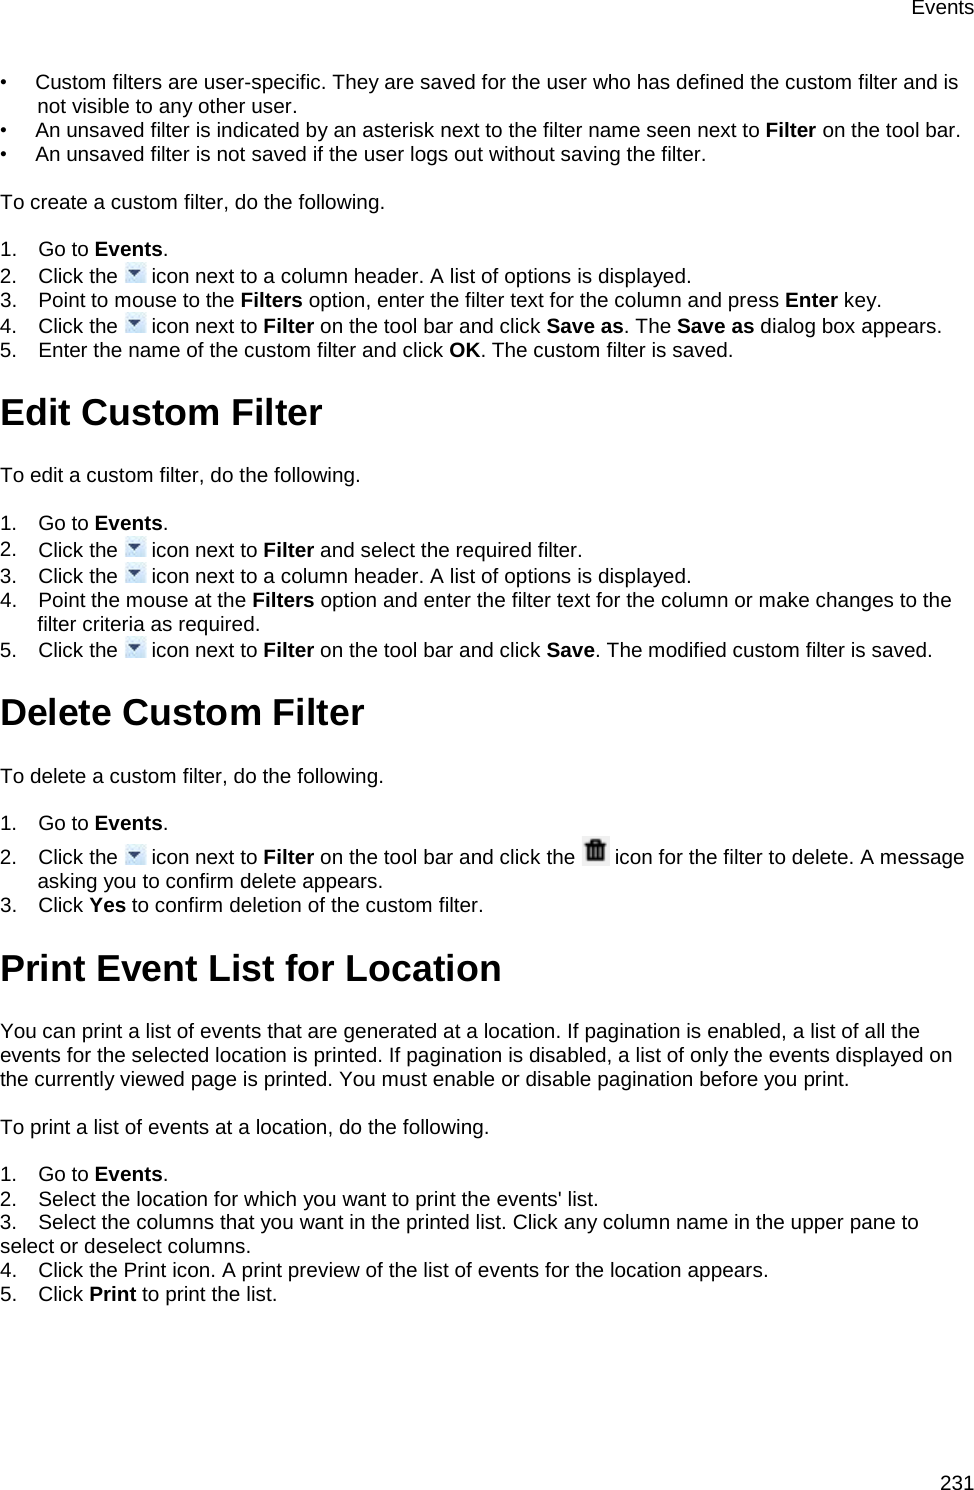 Events 231 •        Custom filters are user-specific. They are saved for the user who has defined the custom filter and is not visible to any other user. •        An unsaved filter is indicated by an asterisk next to the filter name seen next to Filter on the tool bar.  •        An unsaved filter is not saved if the user logs out without saving the filter.    To create a custom filter, do the following.   1.      Go to Events. 2.      Click the   icon next to a column header. A list of options is displayed. 3.      Point to mouse to the Filters option, enter the filter text for the column and press Enter key. 4.      Click the   icon next to Filter on the tool bar and click Save as. The Save as dialog box appears. 5.      Enter the name of the custom filter and click OK. The custom filter is saved. Edit Custom Filter To edit a custom filter, do the following.   1.      Go to Events. 2.      Click the   icon next to Filter and select the required filter.  3.      Click the   icon next to a column header. A list of options is displayed. 4.      Point the mouse at the Filters option and enter the filter text for the column or make changes to the filter criteria as required. 5.      Click the   icon next to Filter on the tool bar and click Save. The modified custom filter is saved. Delete Custom Filter To delete a custom filter, do the following.   1.      Go to Events. 2.      Click the   icon next to Filter on the tool bar and click the   icon for the filter to delete. A message asking you to confirm delete appears. 3.      Click Yes to confirm deletion of the custom filter. Print Event List for Location You can print a list of events that are generated at a location. If pagination is enabled, a list of all the events for the selected location is printed. If pagination is disabled, a list of only the events displayed on the currently viewed page is printed. You must enable or disable pagination before you print.   To print a list of events at a location, do the following.   1.      Go to Events. 2.      Select the location for which you want to print the events&apos; list. 3.      Select the columns that you want in the printed list. Click any column name in the upper pane to select or deselect columns. 4.      Click the Print icon. A print preview of the list of events for the location appears. 5.      Click Print to print the list. 